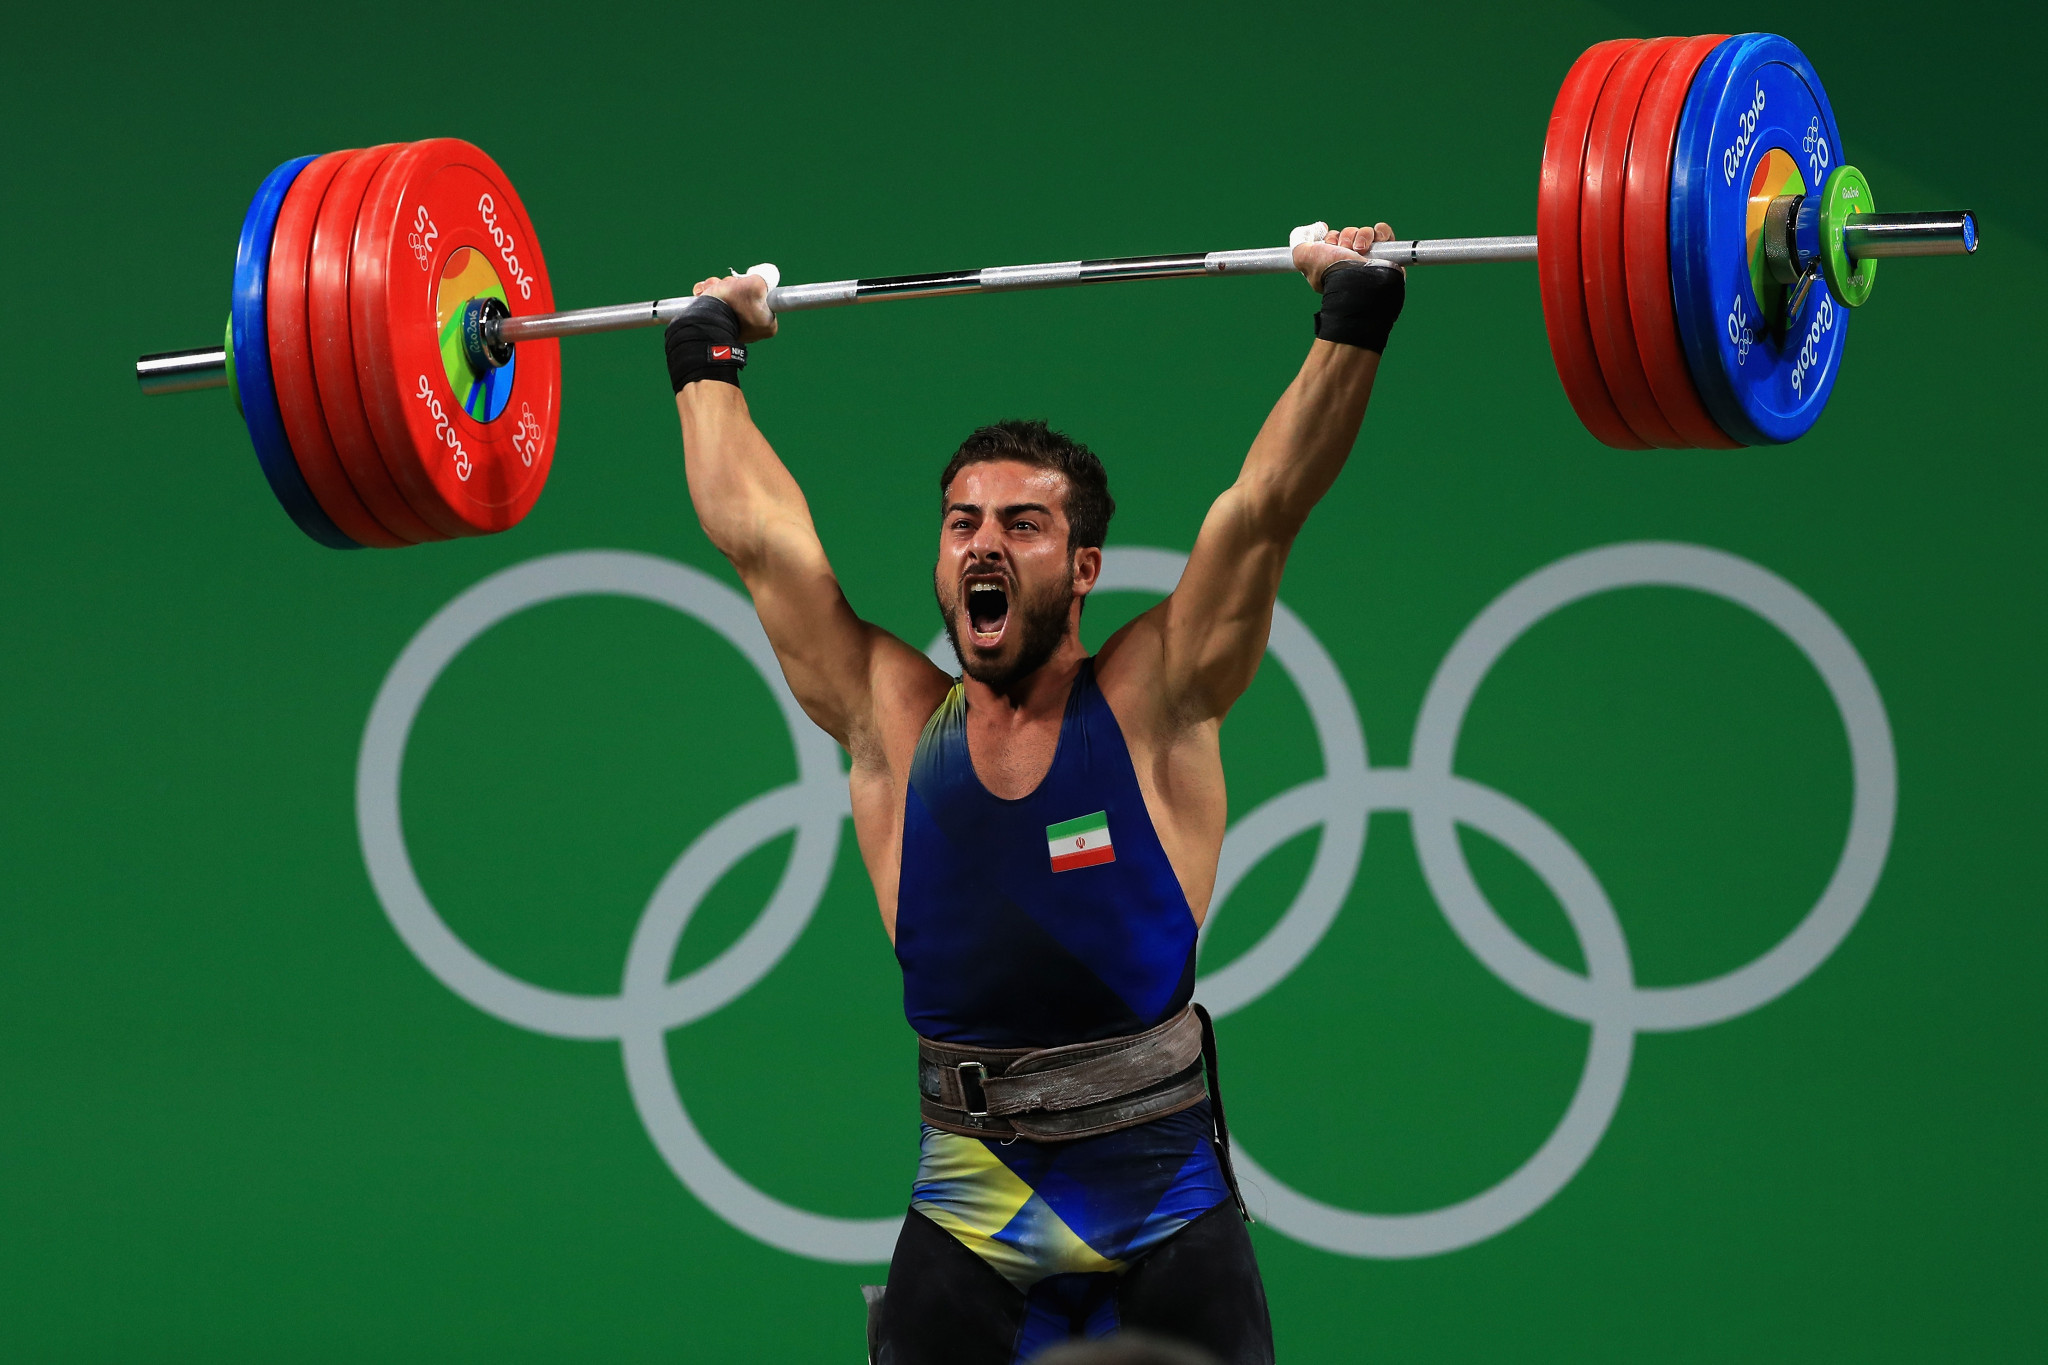 Rio 2016 gold medallist Kianoush Rostami of Iran has been dropped from the team for the IWF World Championships ©Getty Images 